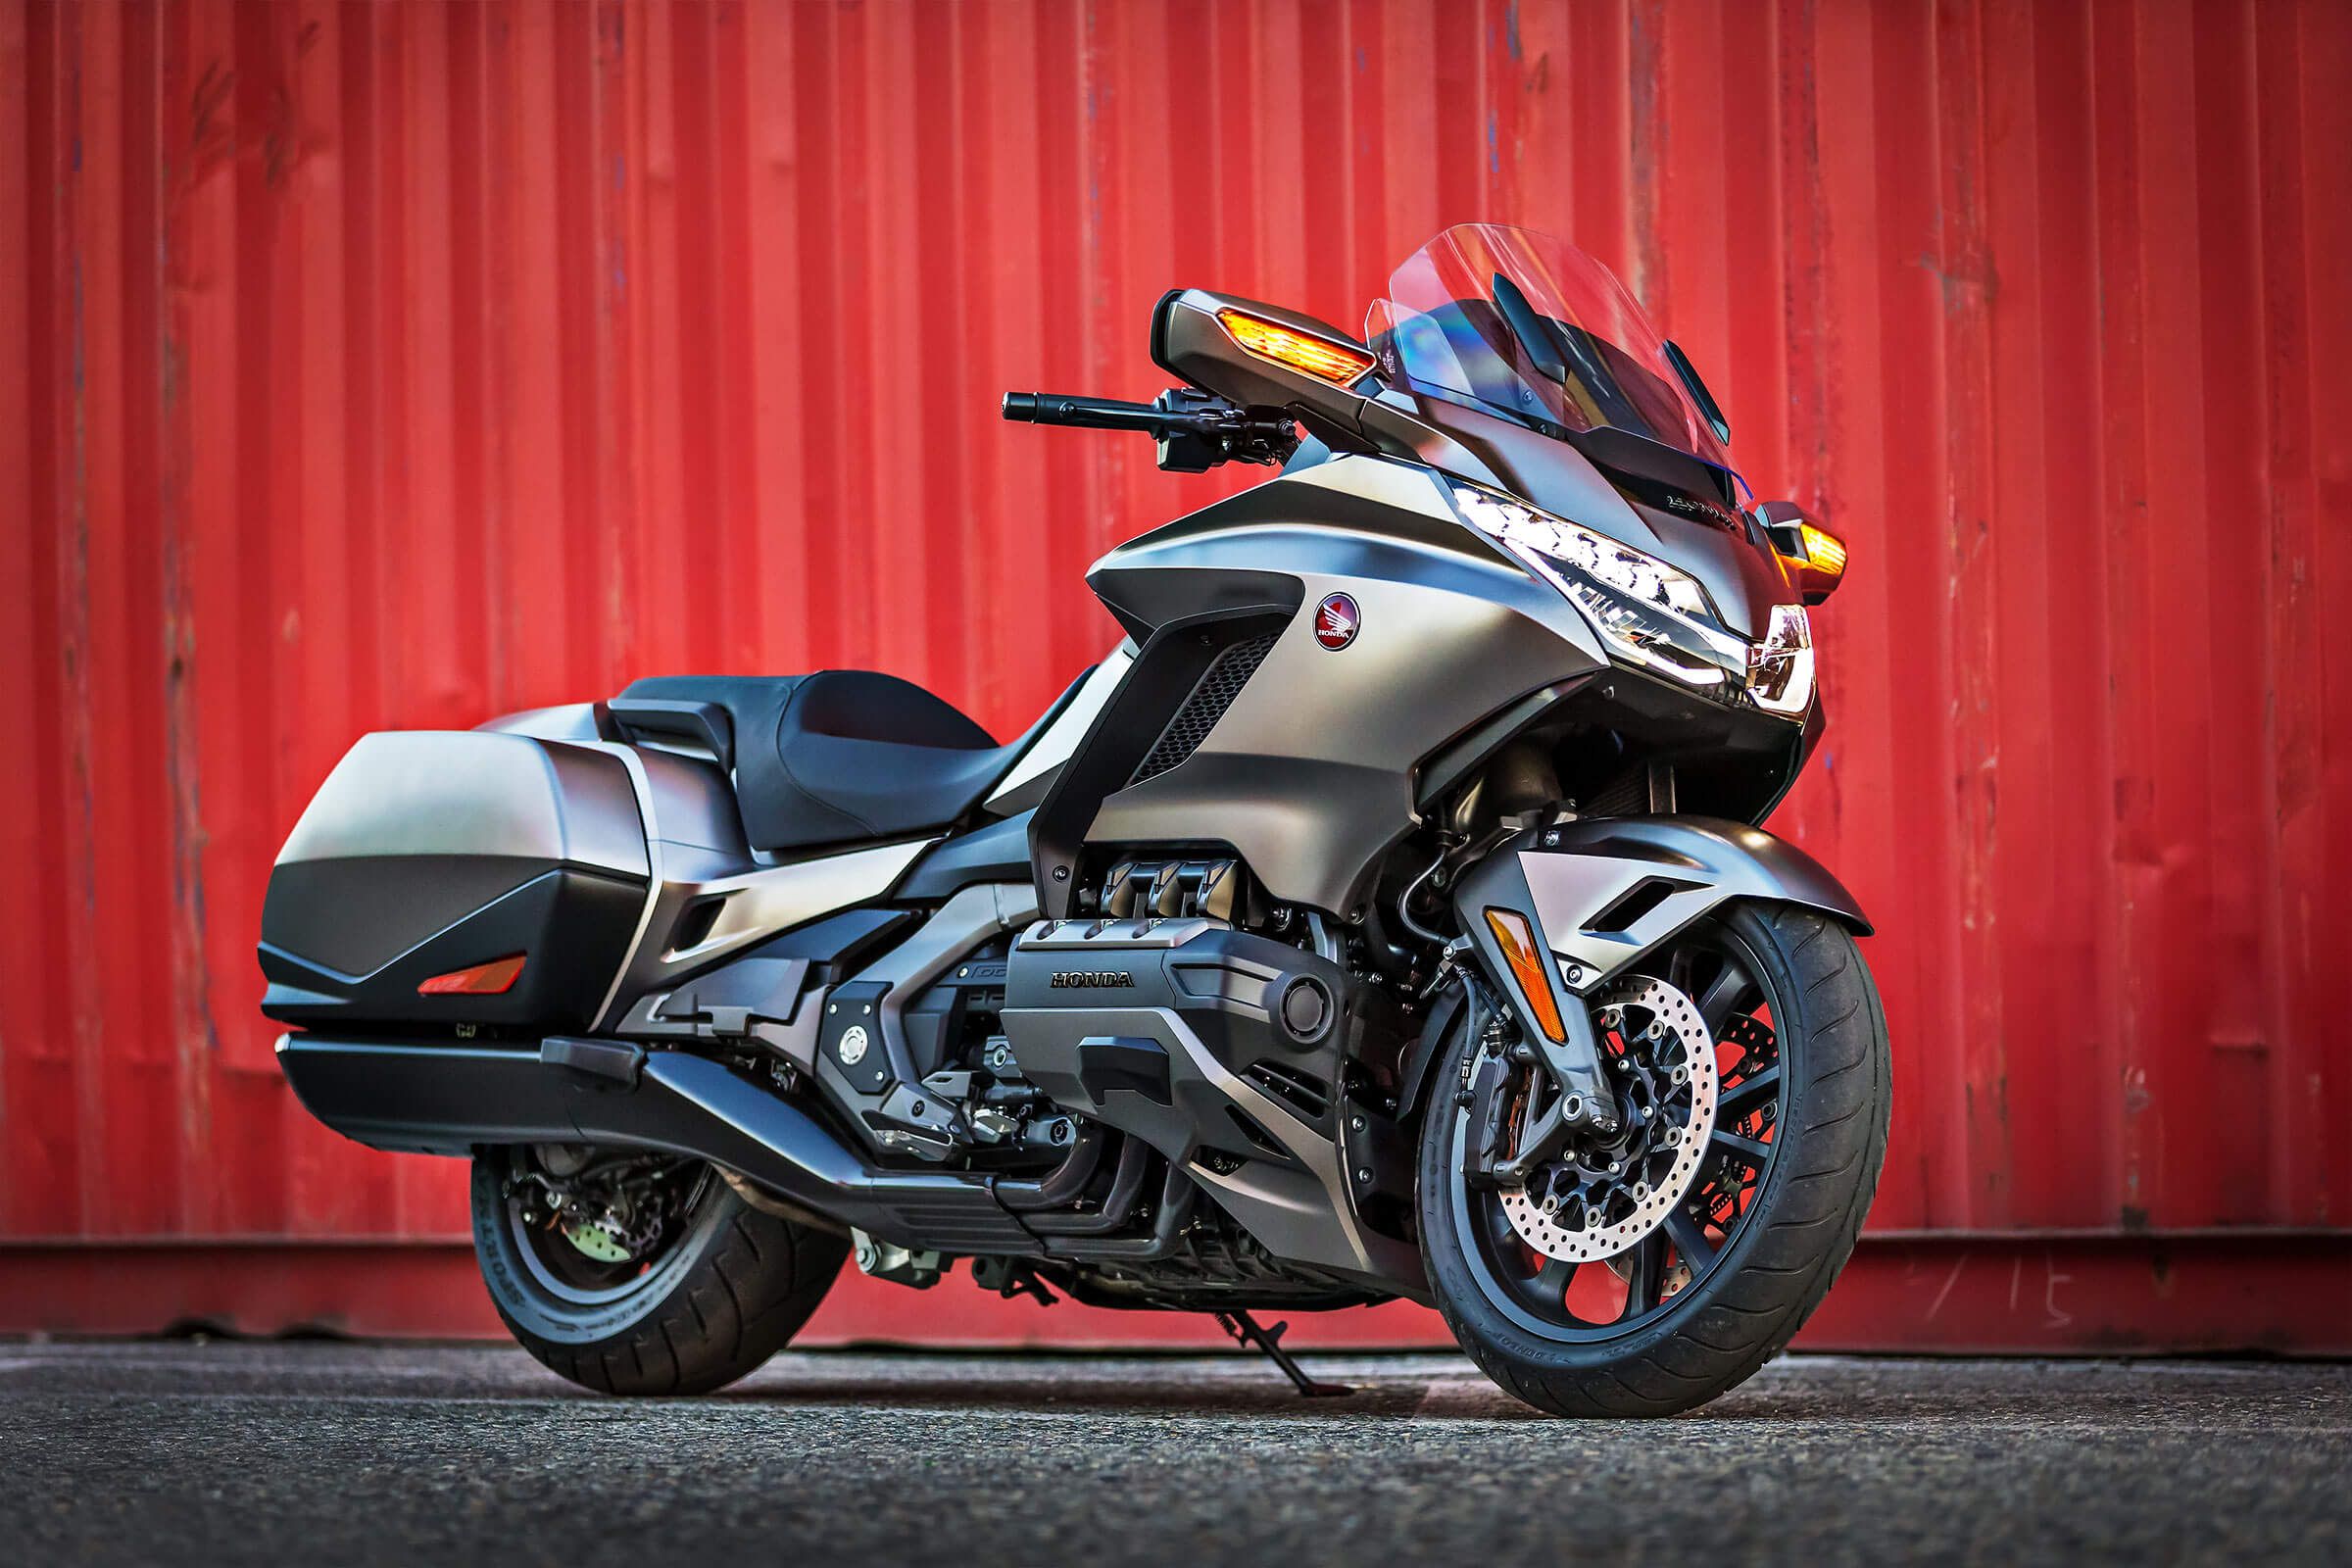 2022 Honda Gold Wing Performance, Price, and Photos